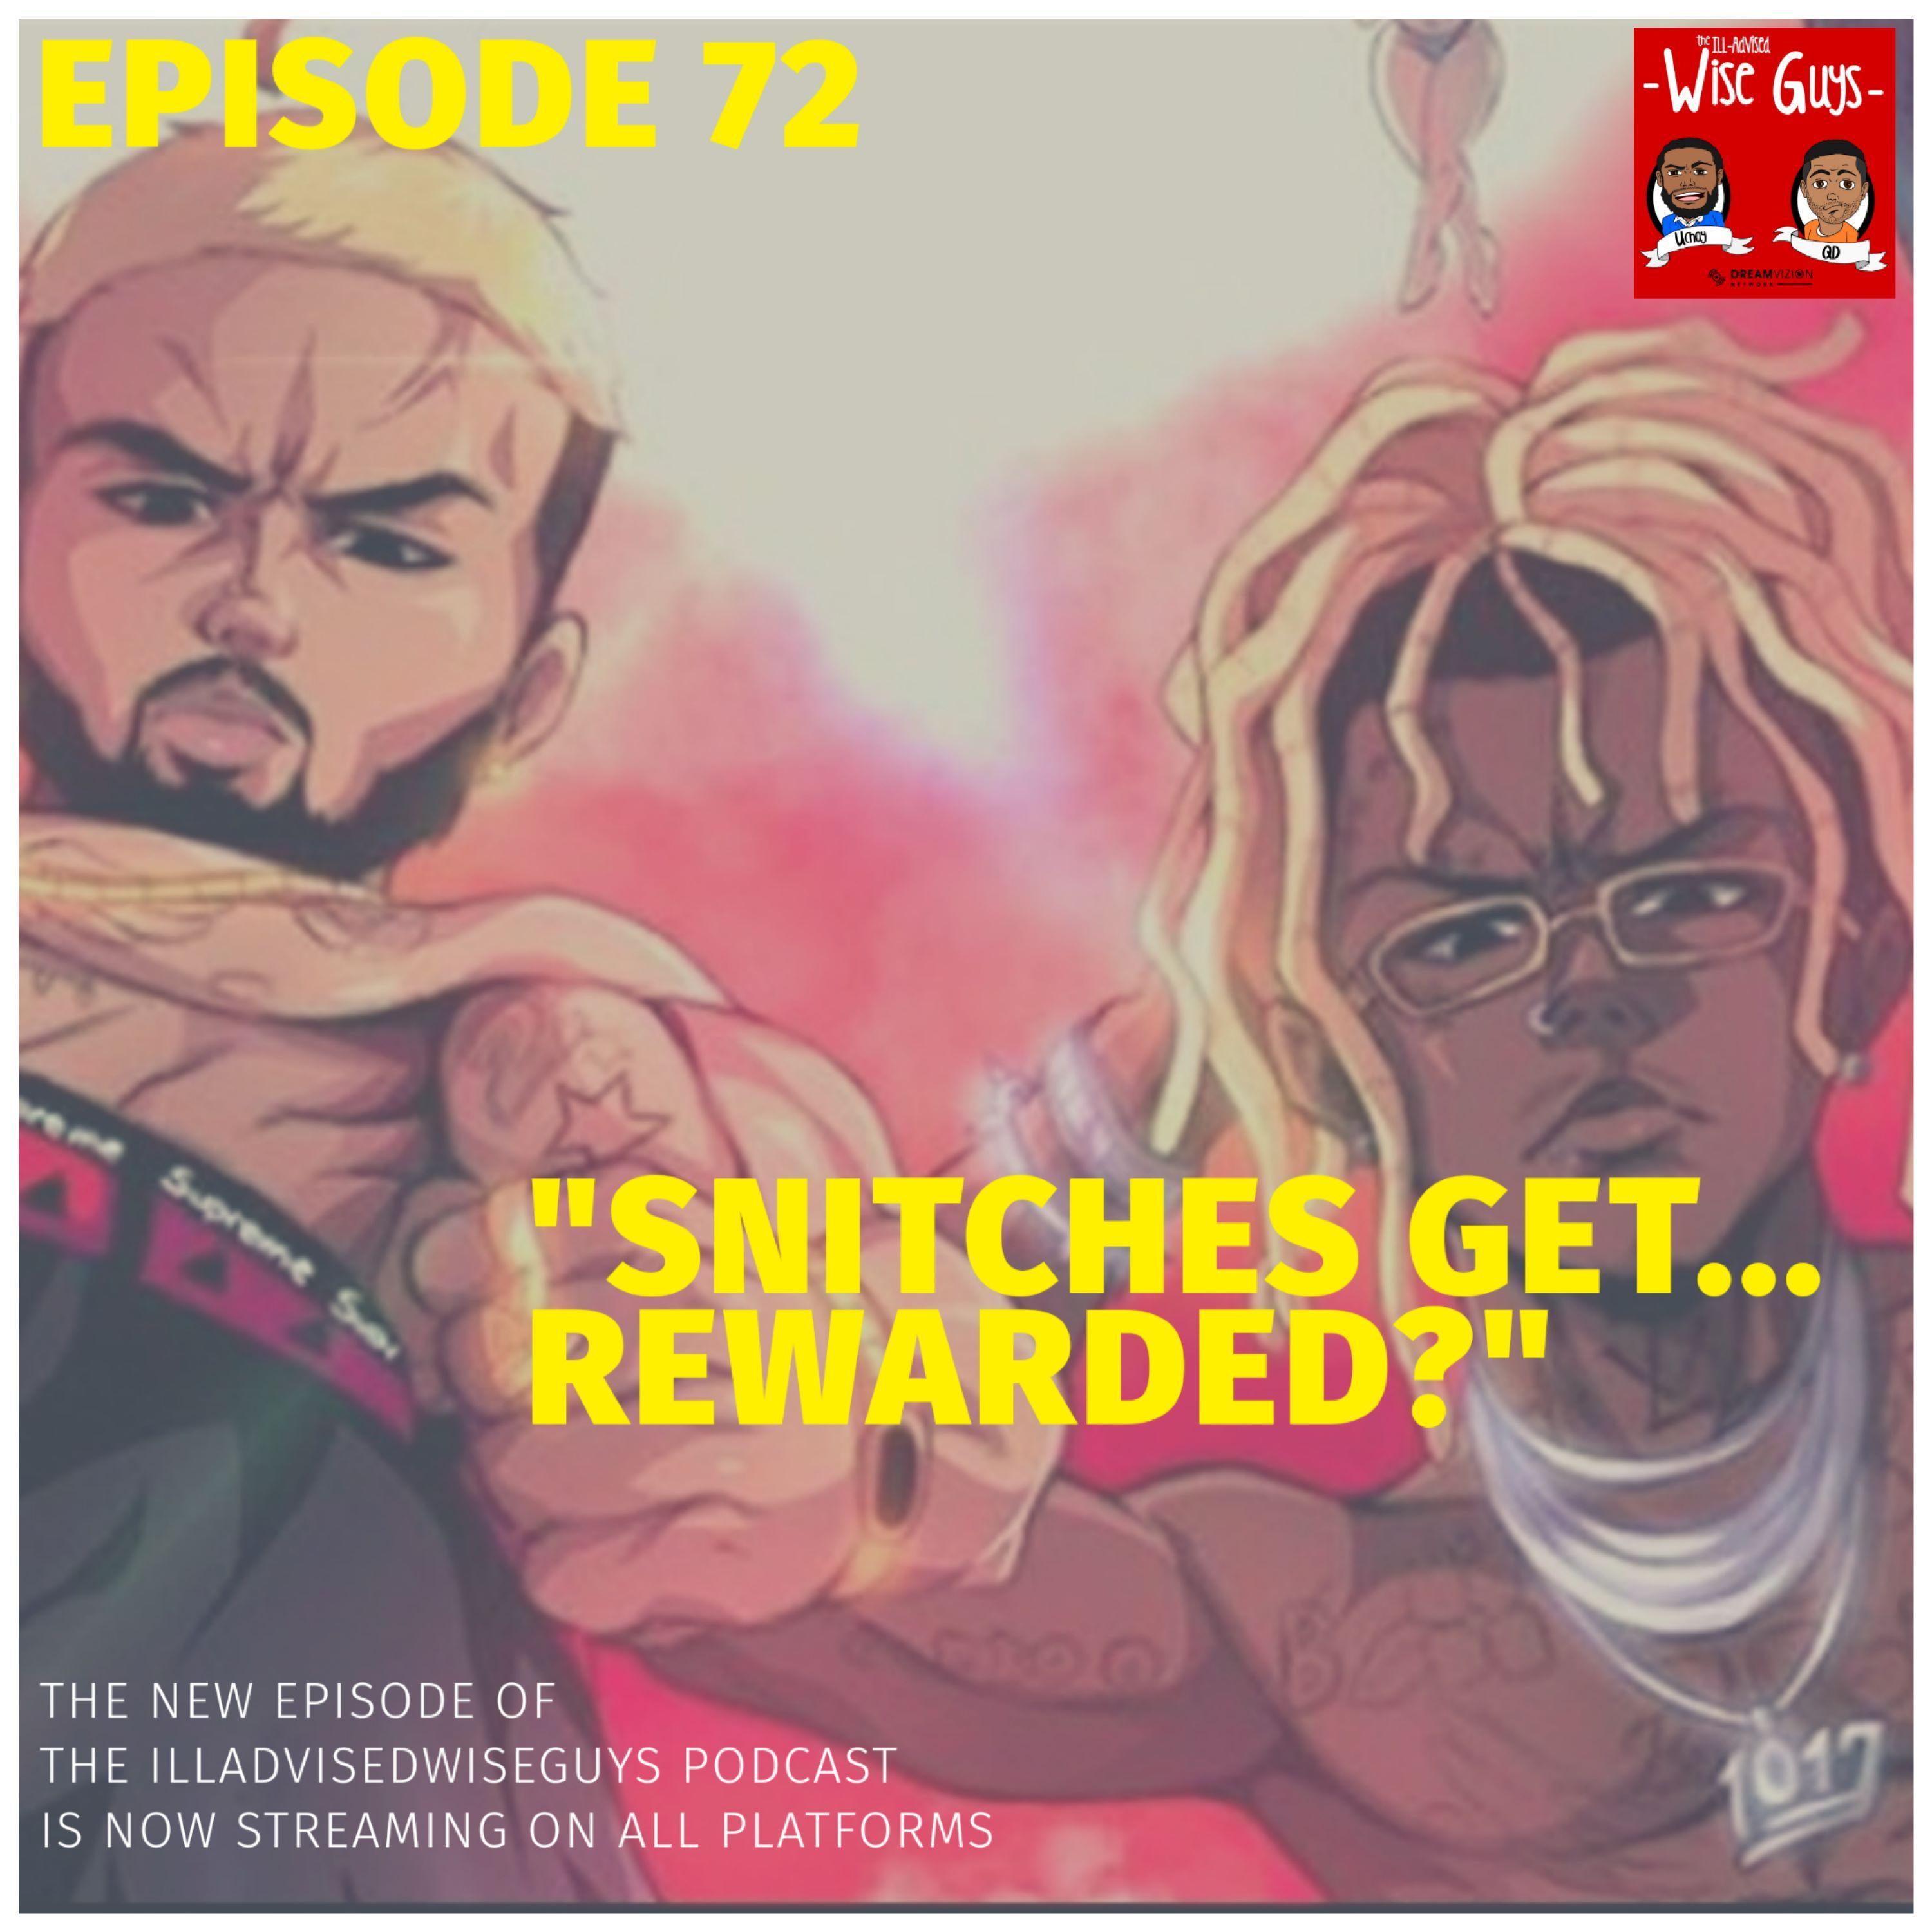 Episode 72 - "Snitches Get...Rewarded?" Image